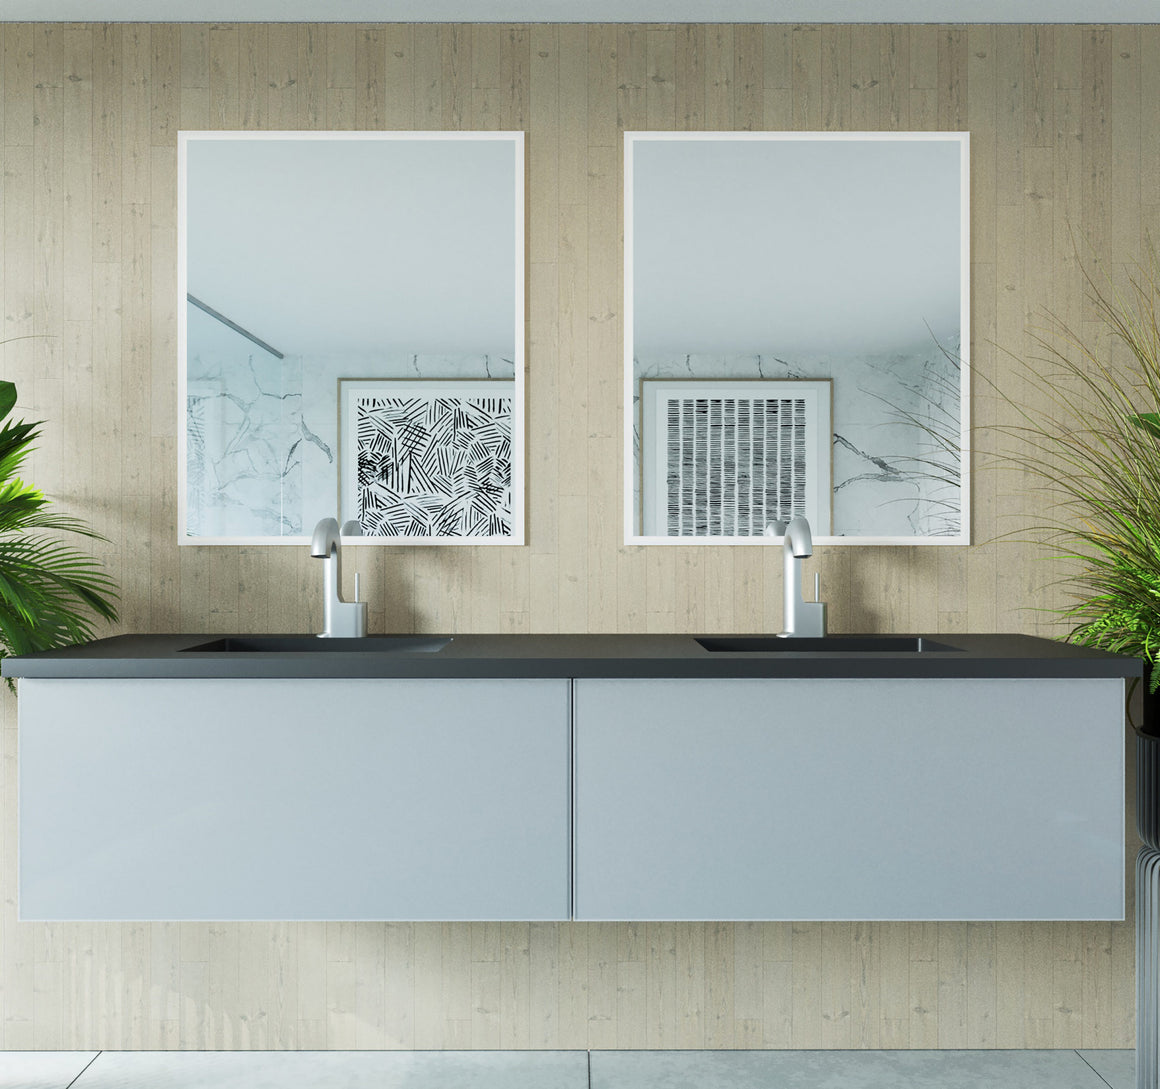 Vitri 72 - Fossil Grey Double Sink Cabinet + Matte Black VIVA Stone Solid Surface Double Sink Countertop